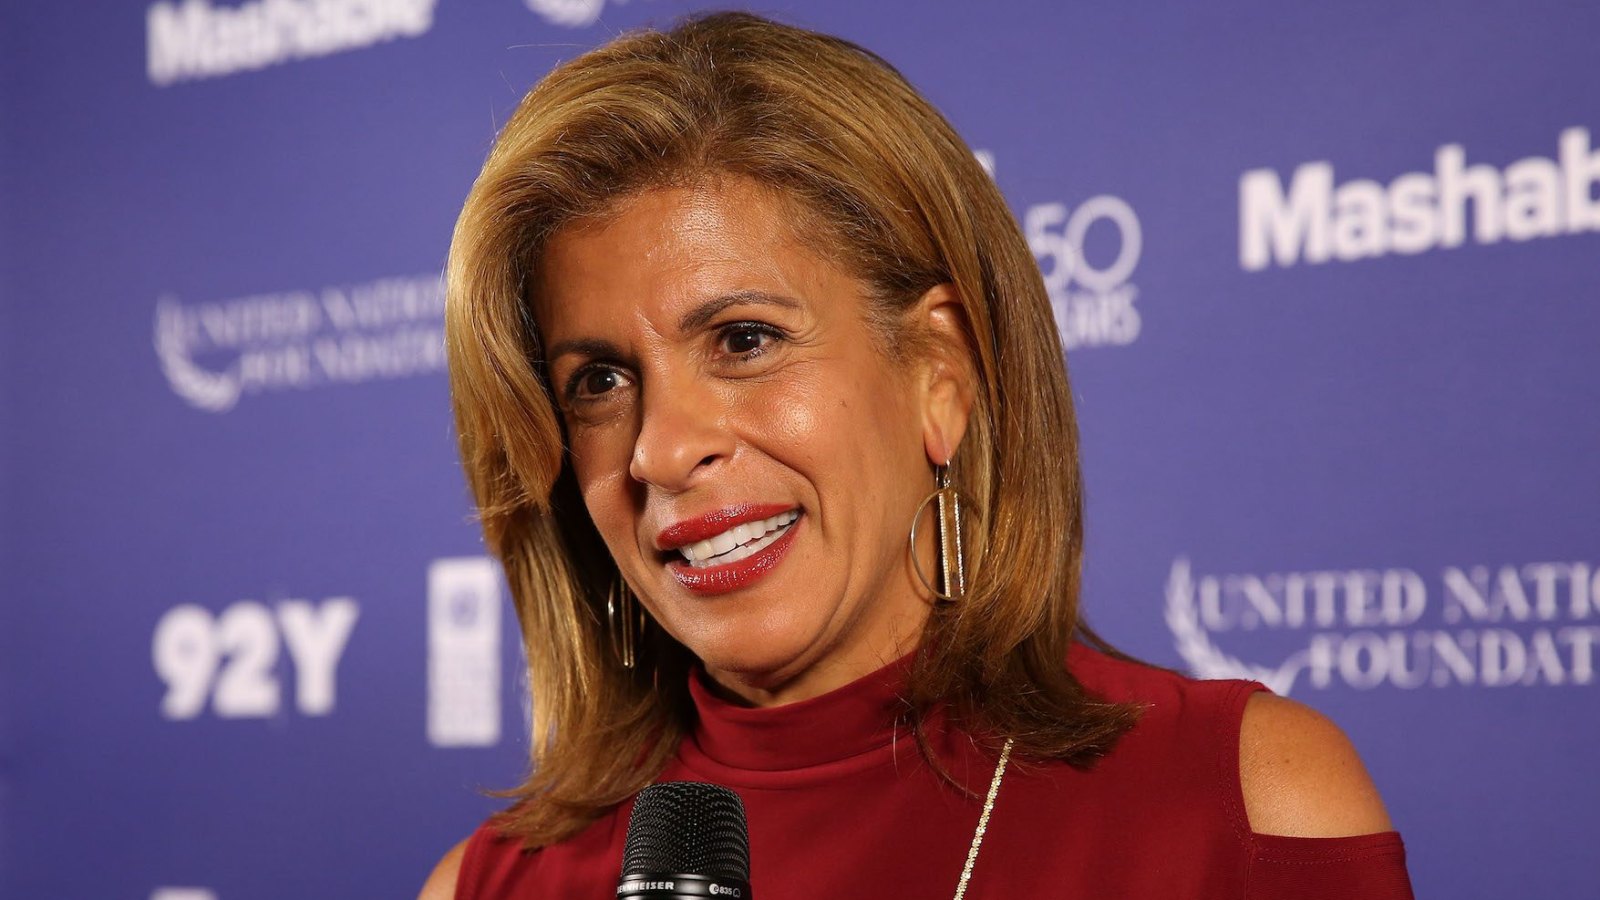 Hoda Kotb Absent From 'Today' Again Following Daughter Hope's Health Scare: She's 'A Bit Under the Weather'